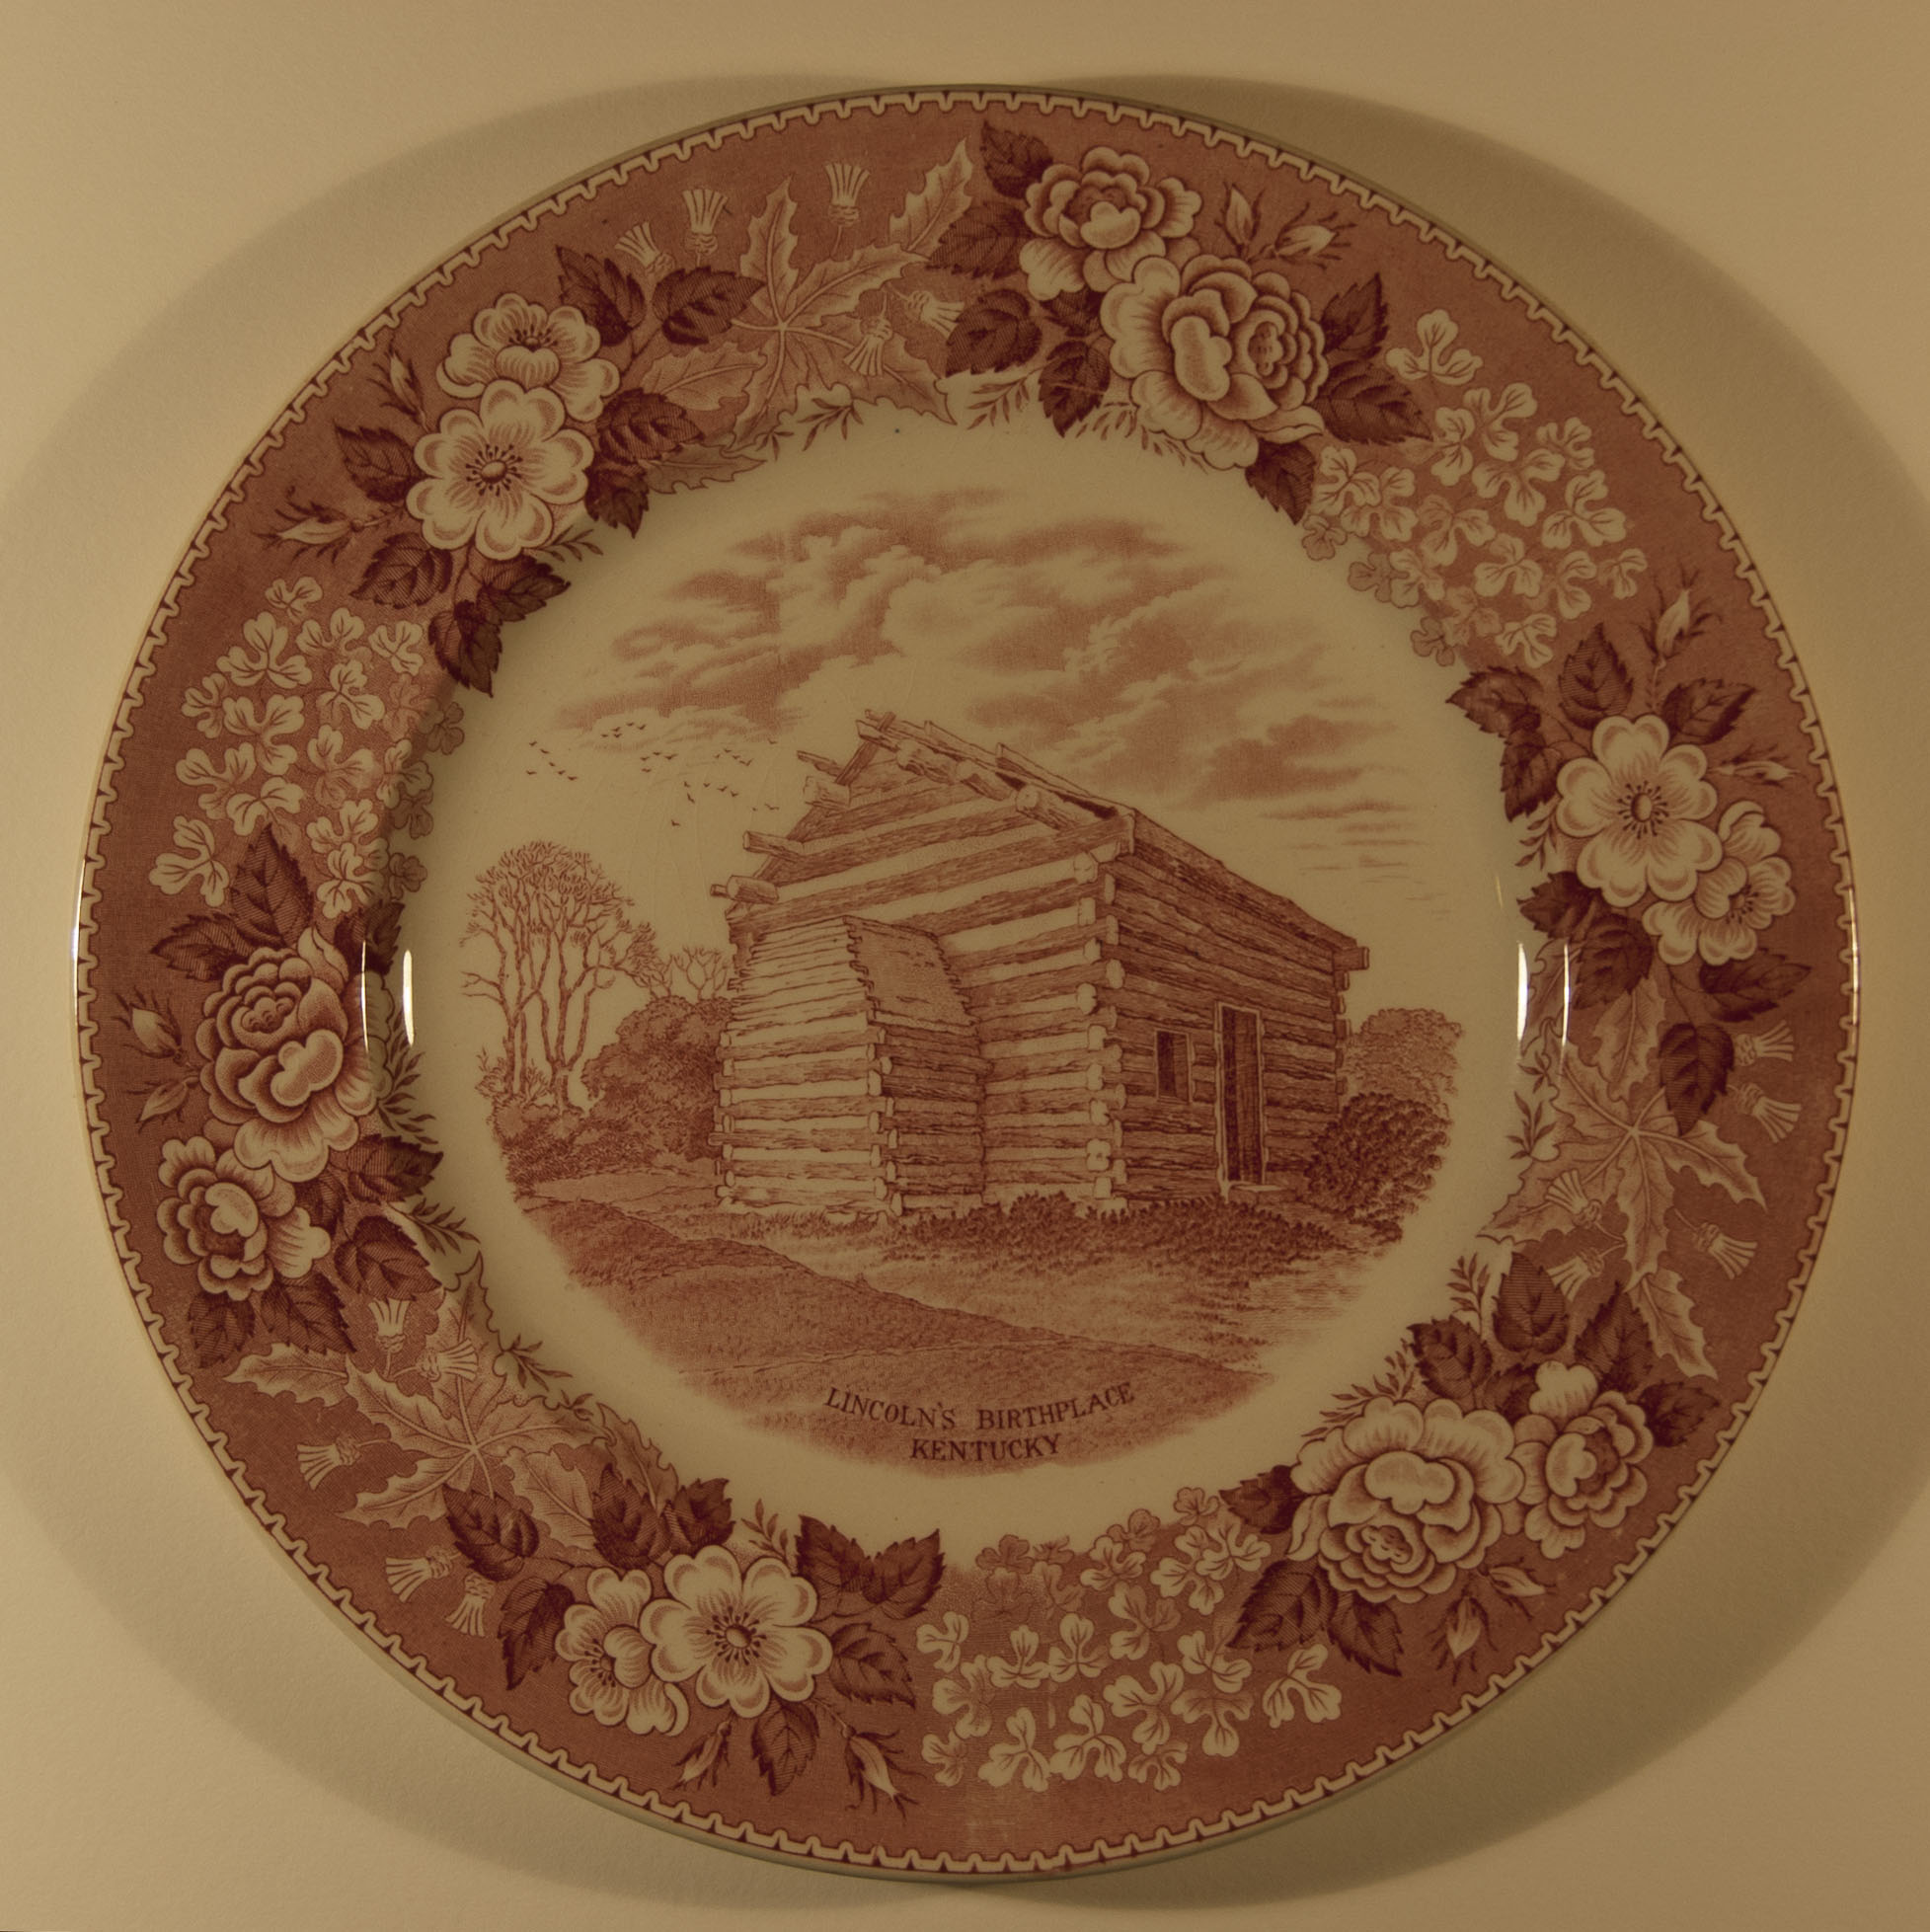 Lincoln’s Birthplace Plate